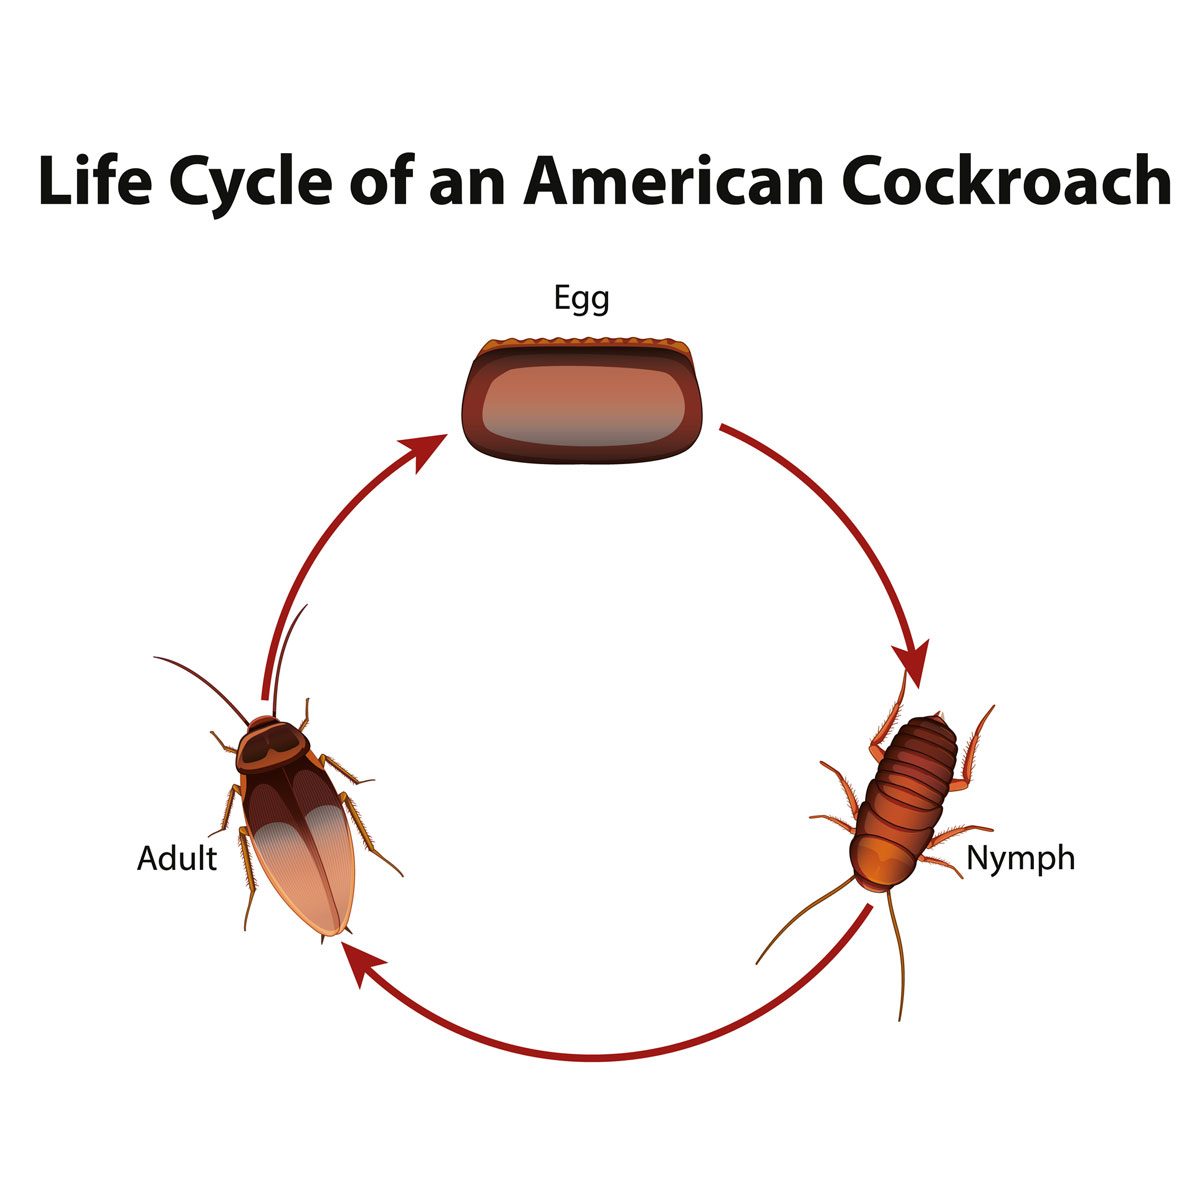 What stage of life do cockroaches carry eggs?